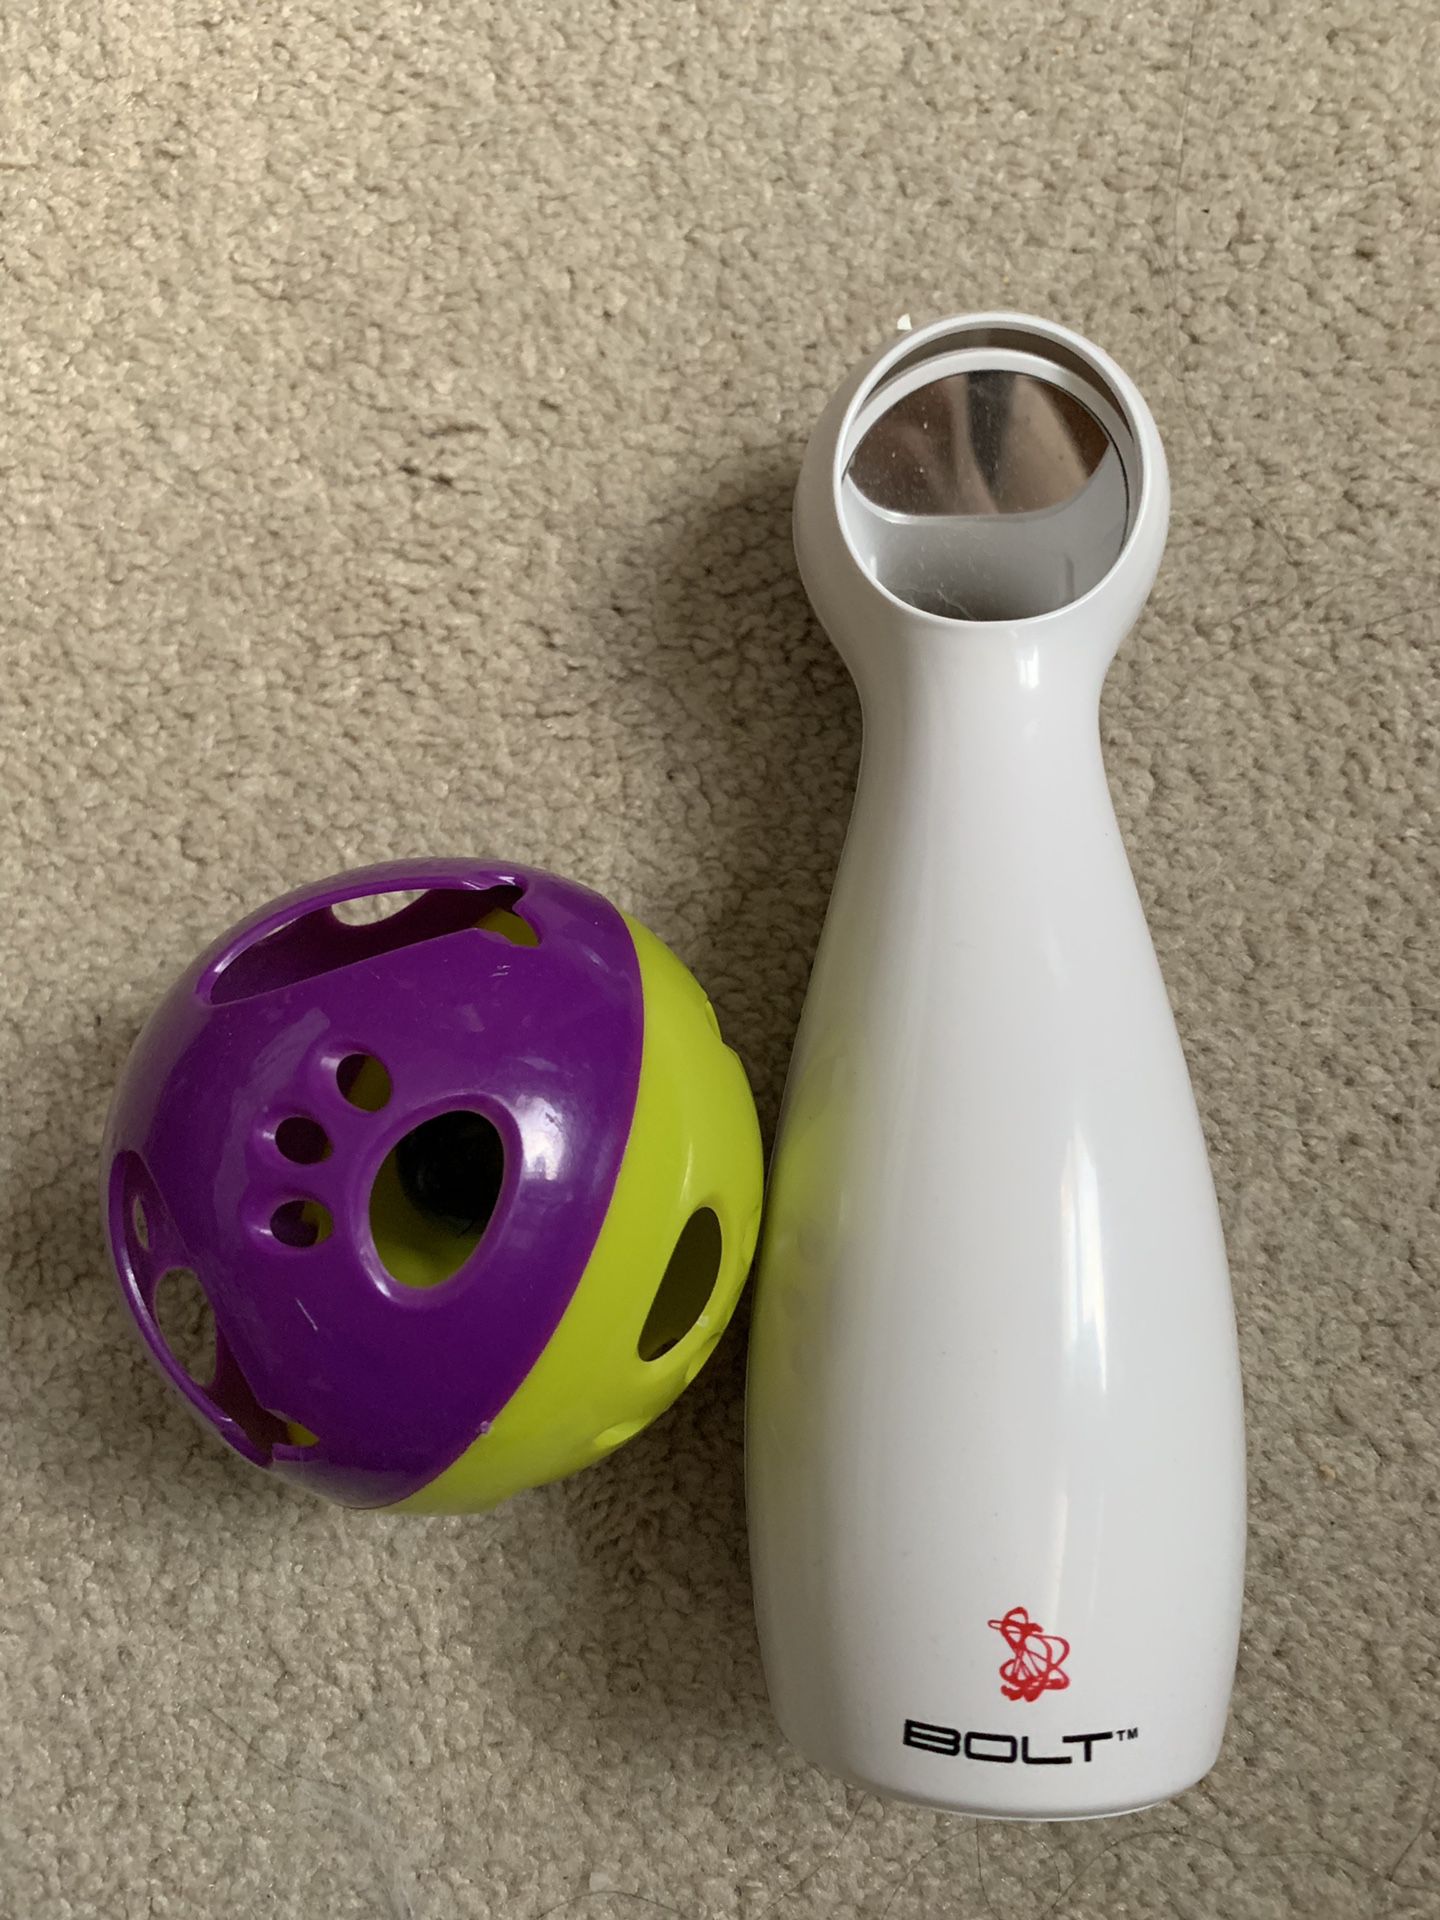 Bolt laser cat toy and ball toy